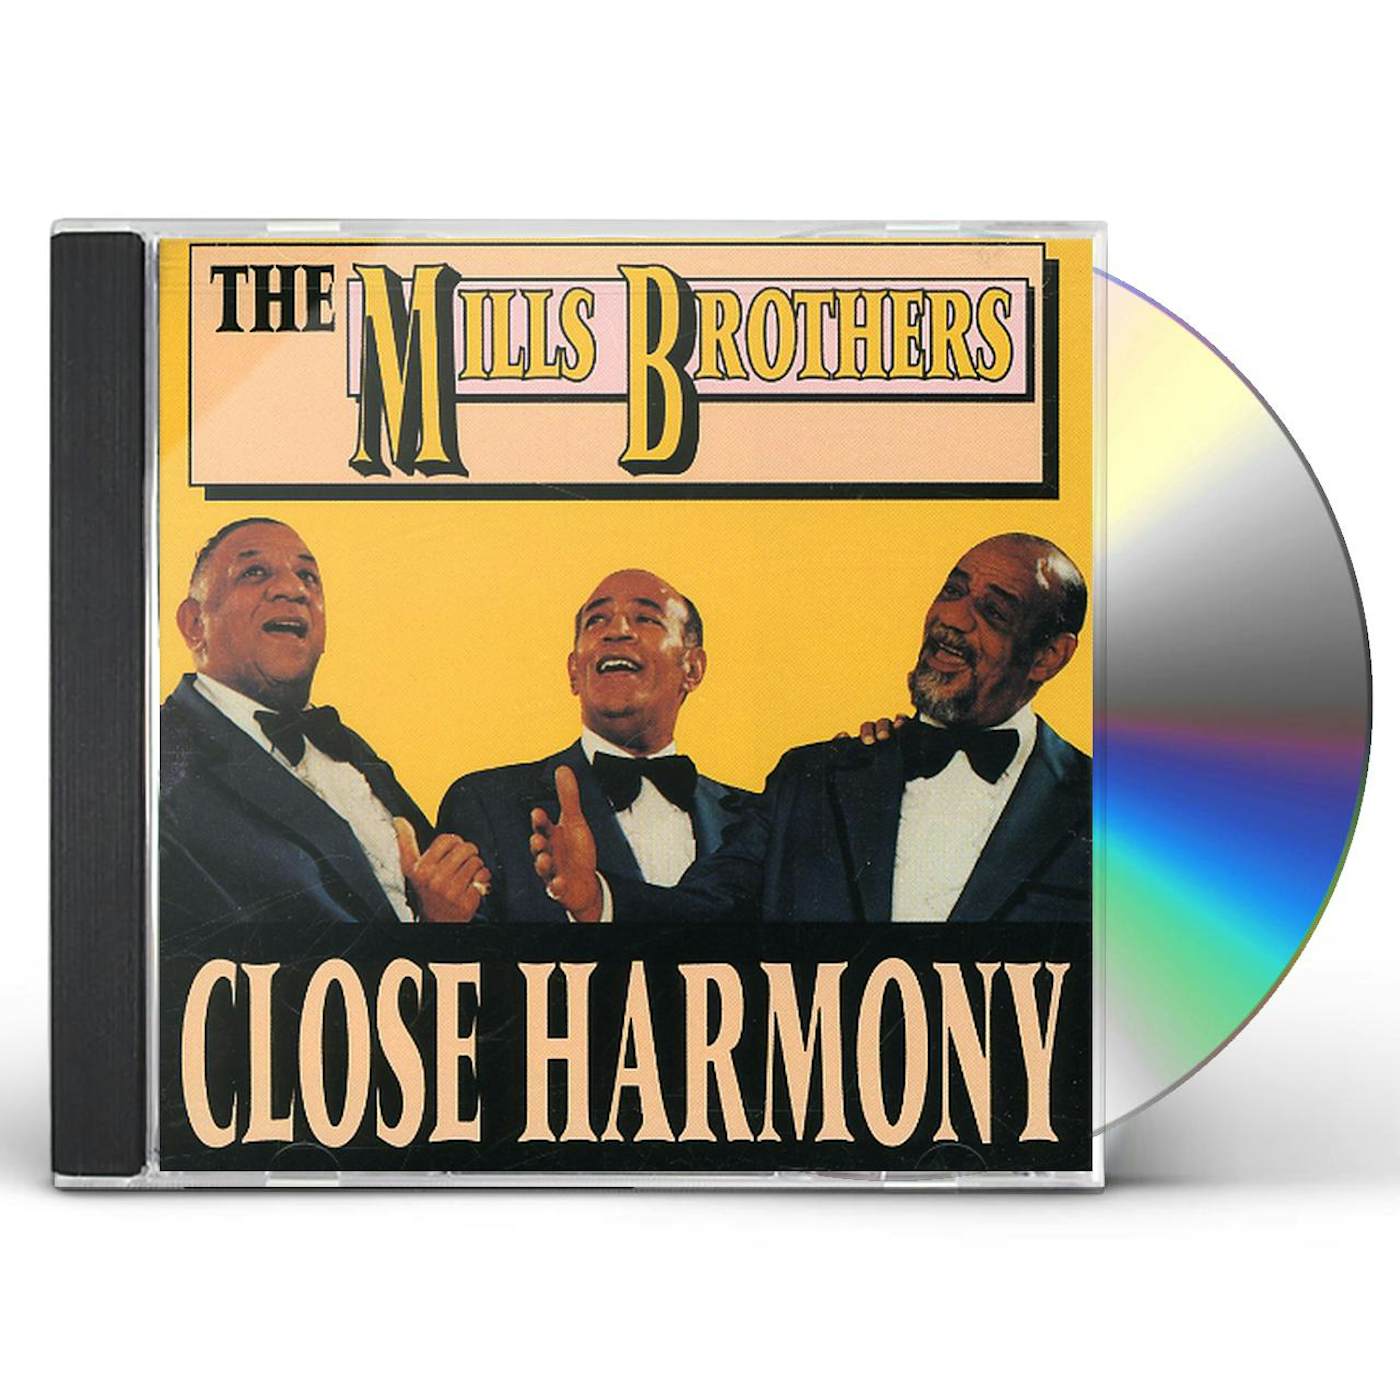 The Mills Brothers CLOSE HARMONY CD